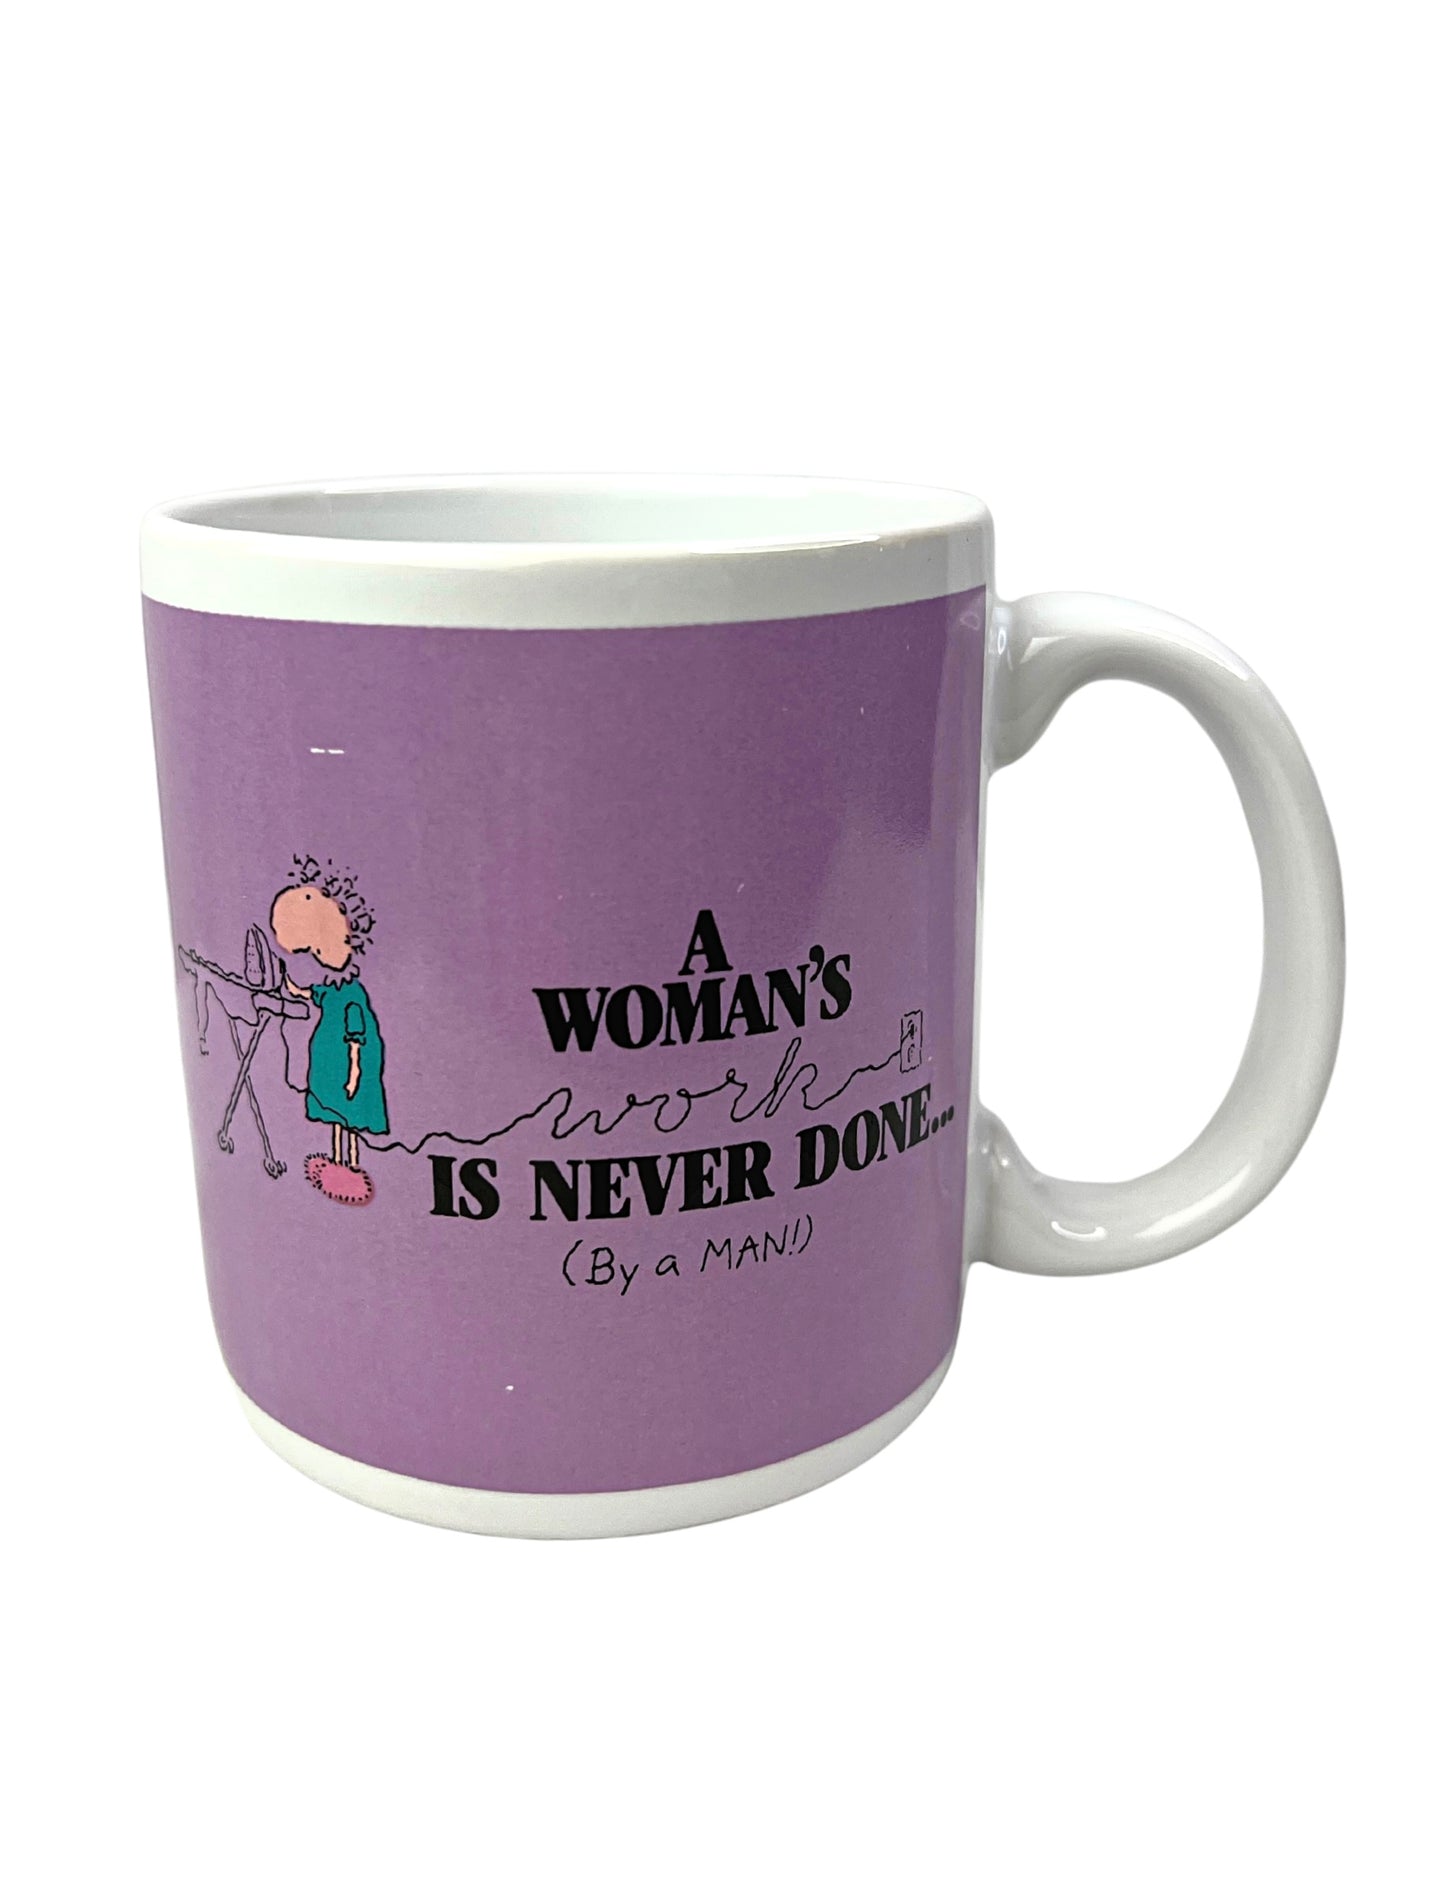 90’s  A Woman’s Work Is Never Done (By a MAN) Funny Coffee Mug